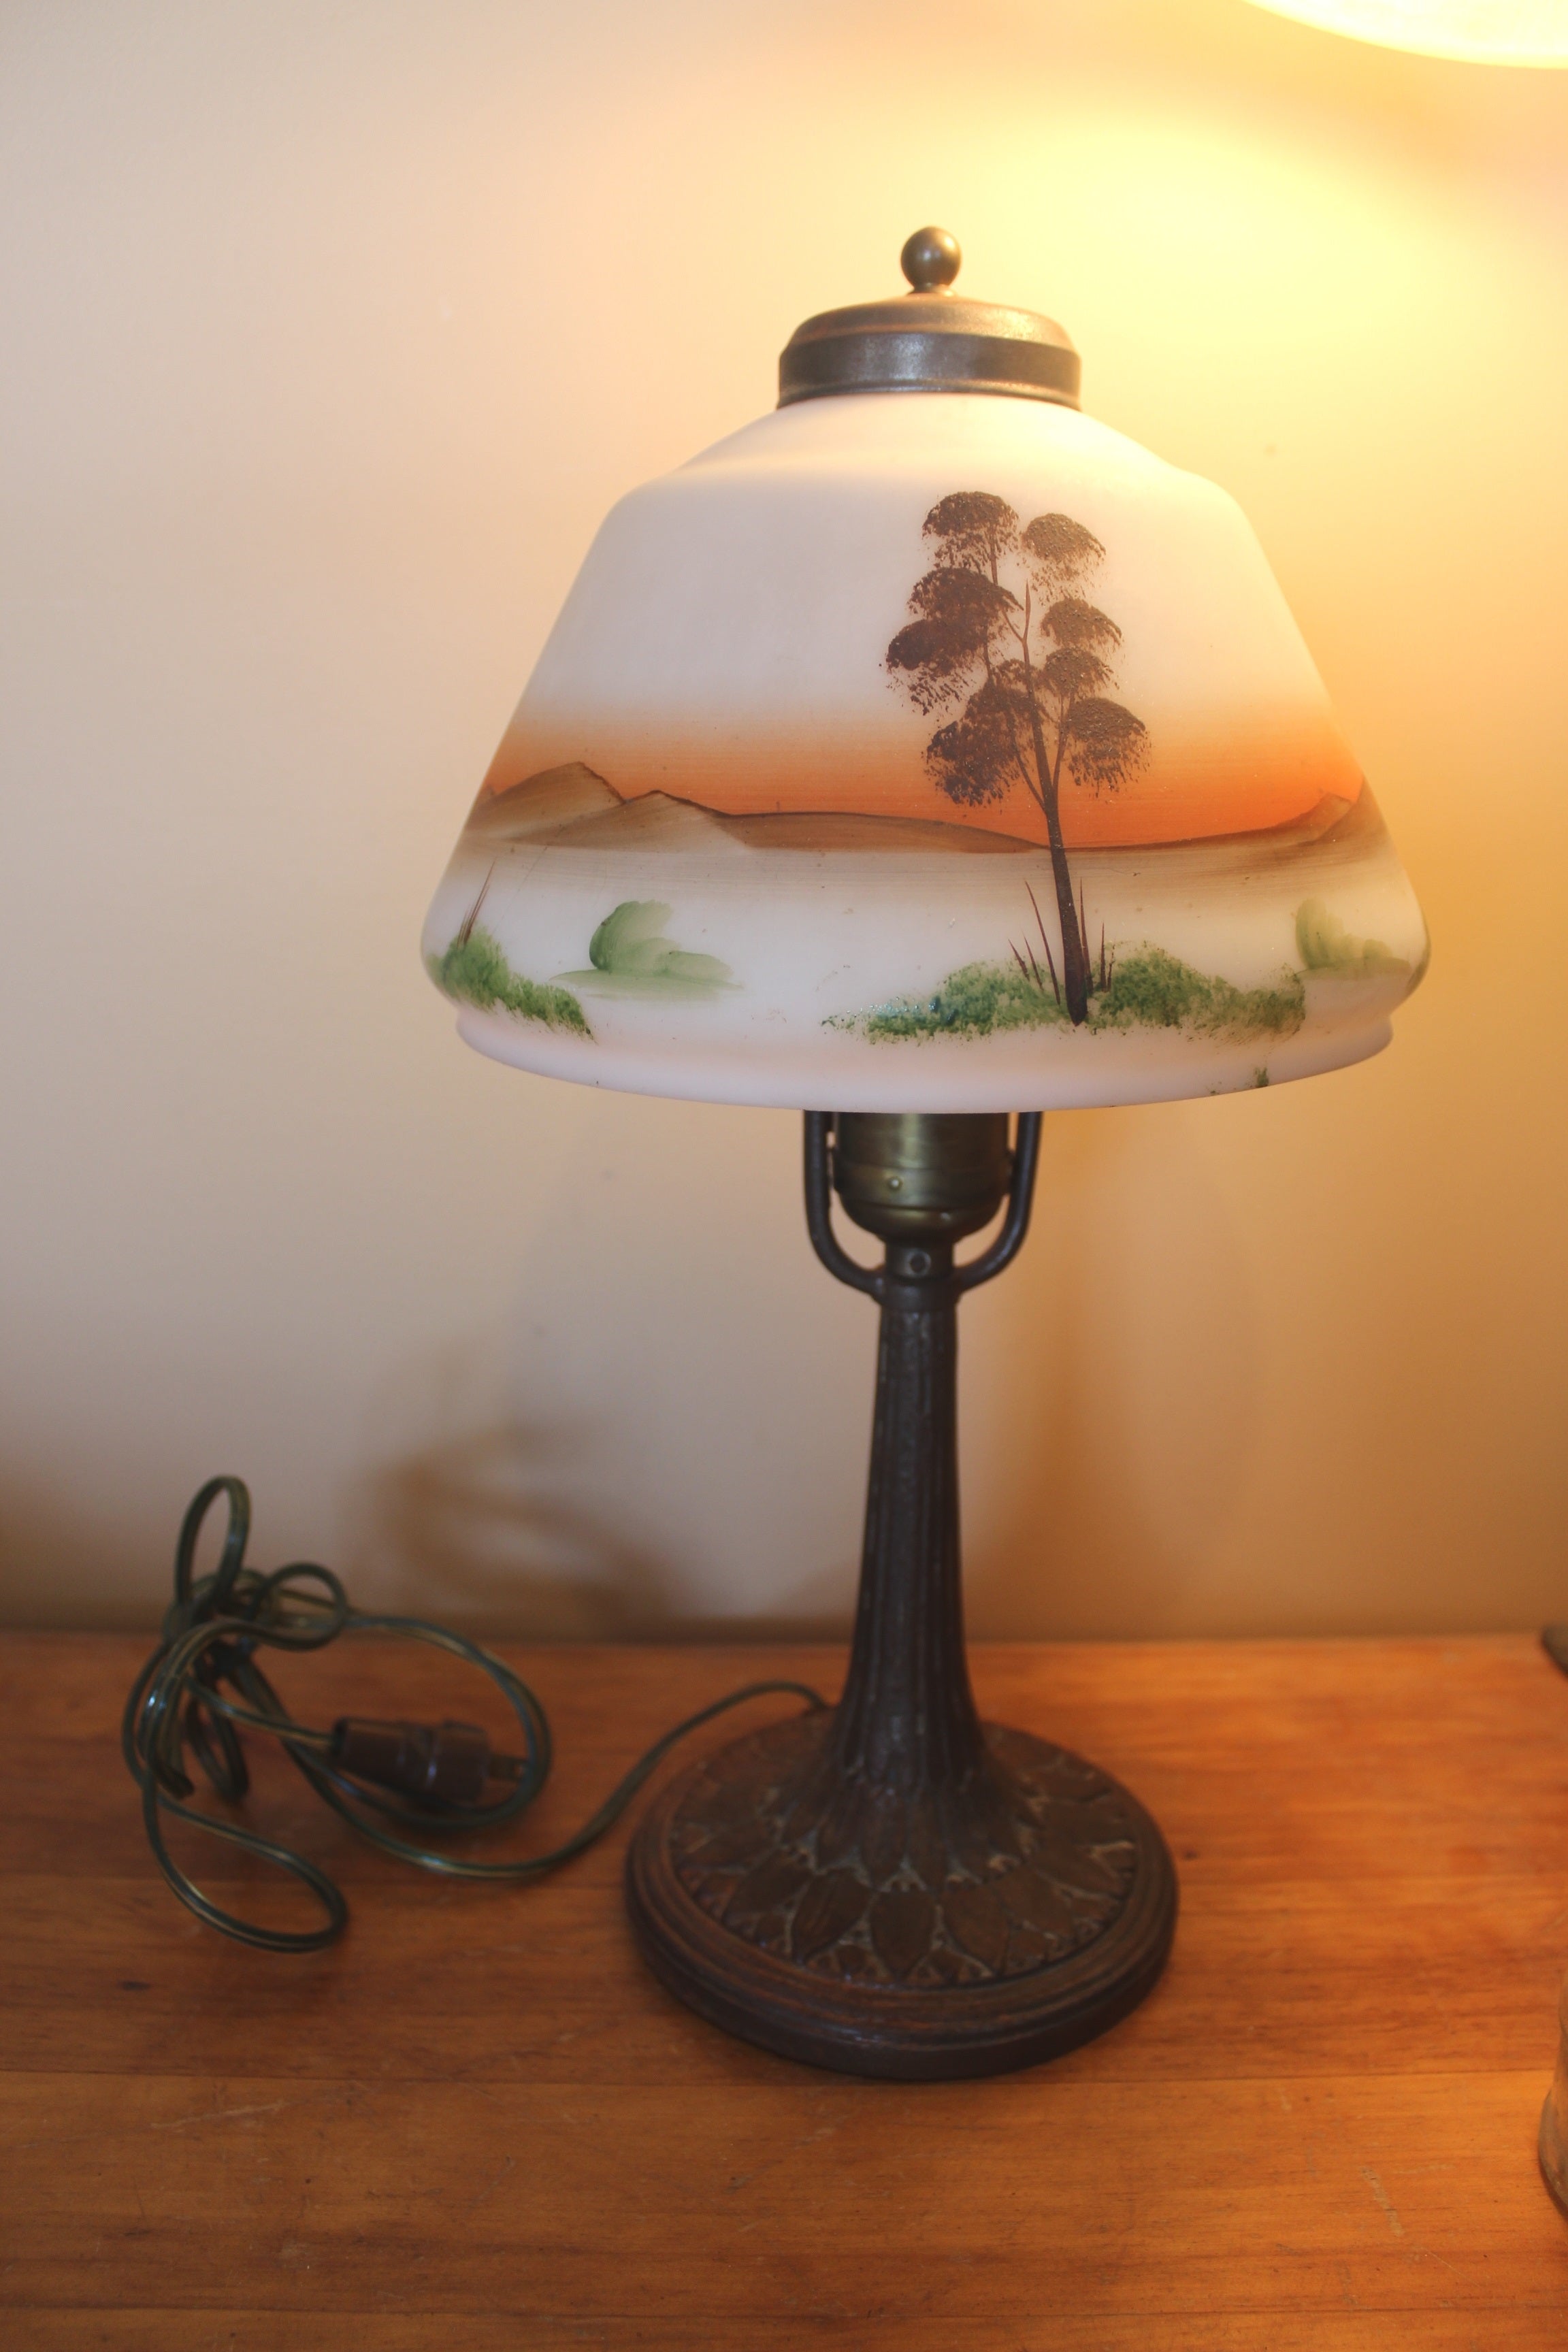 Old metal lamp with decorative glass shade